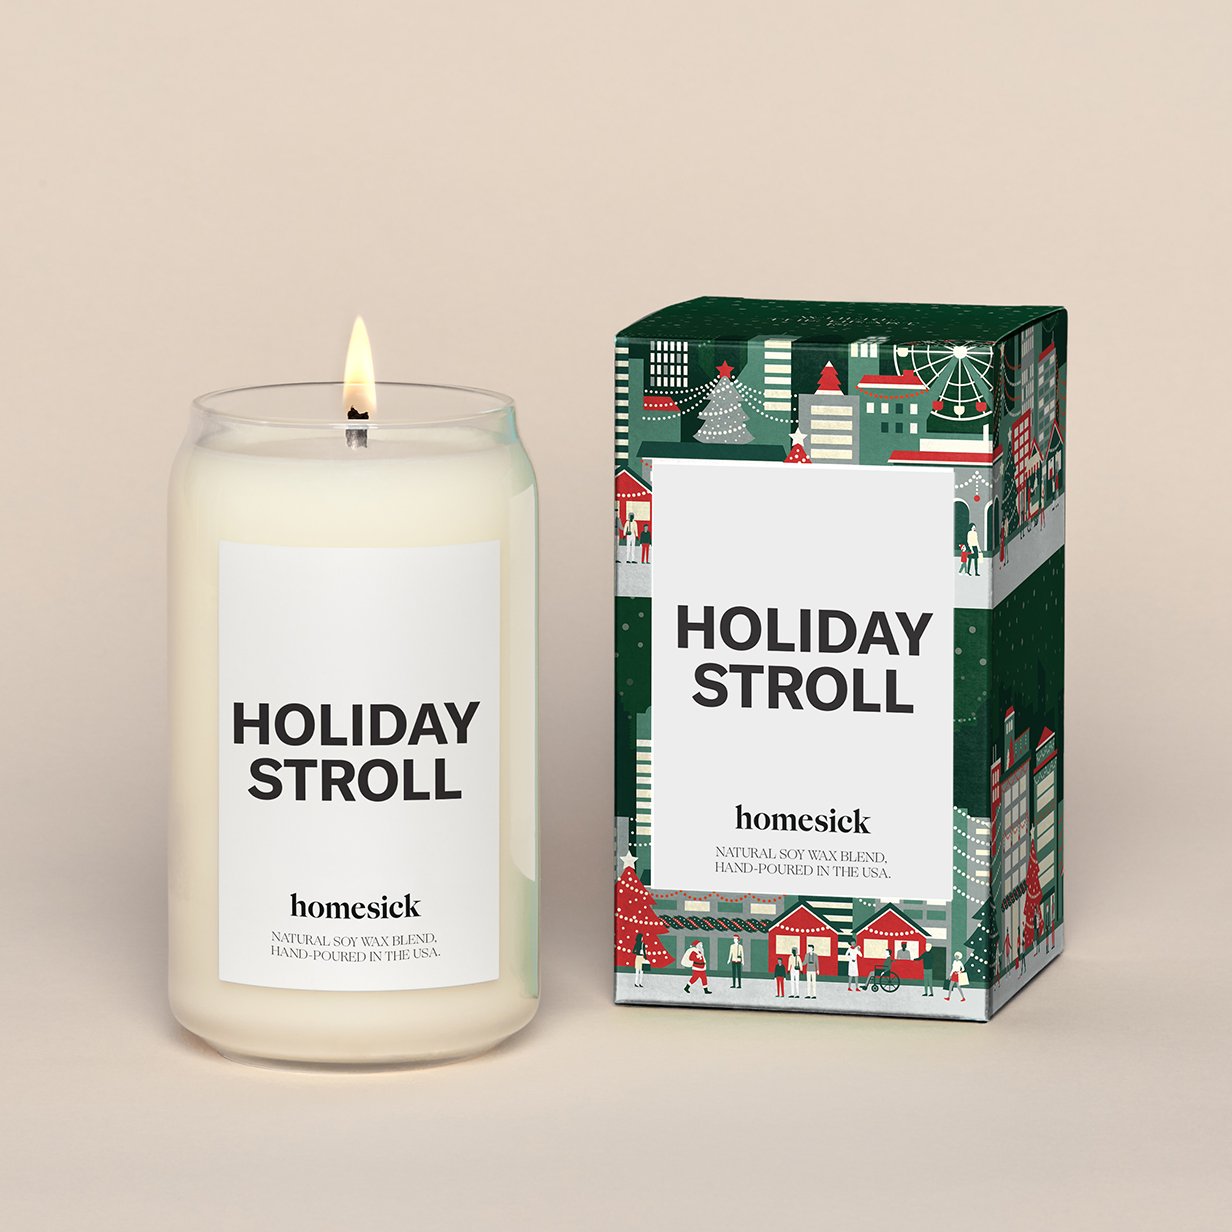 Homesick Holiday Stroll Candle